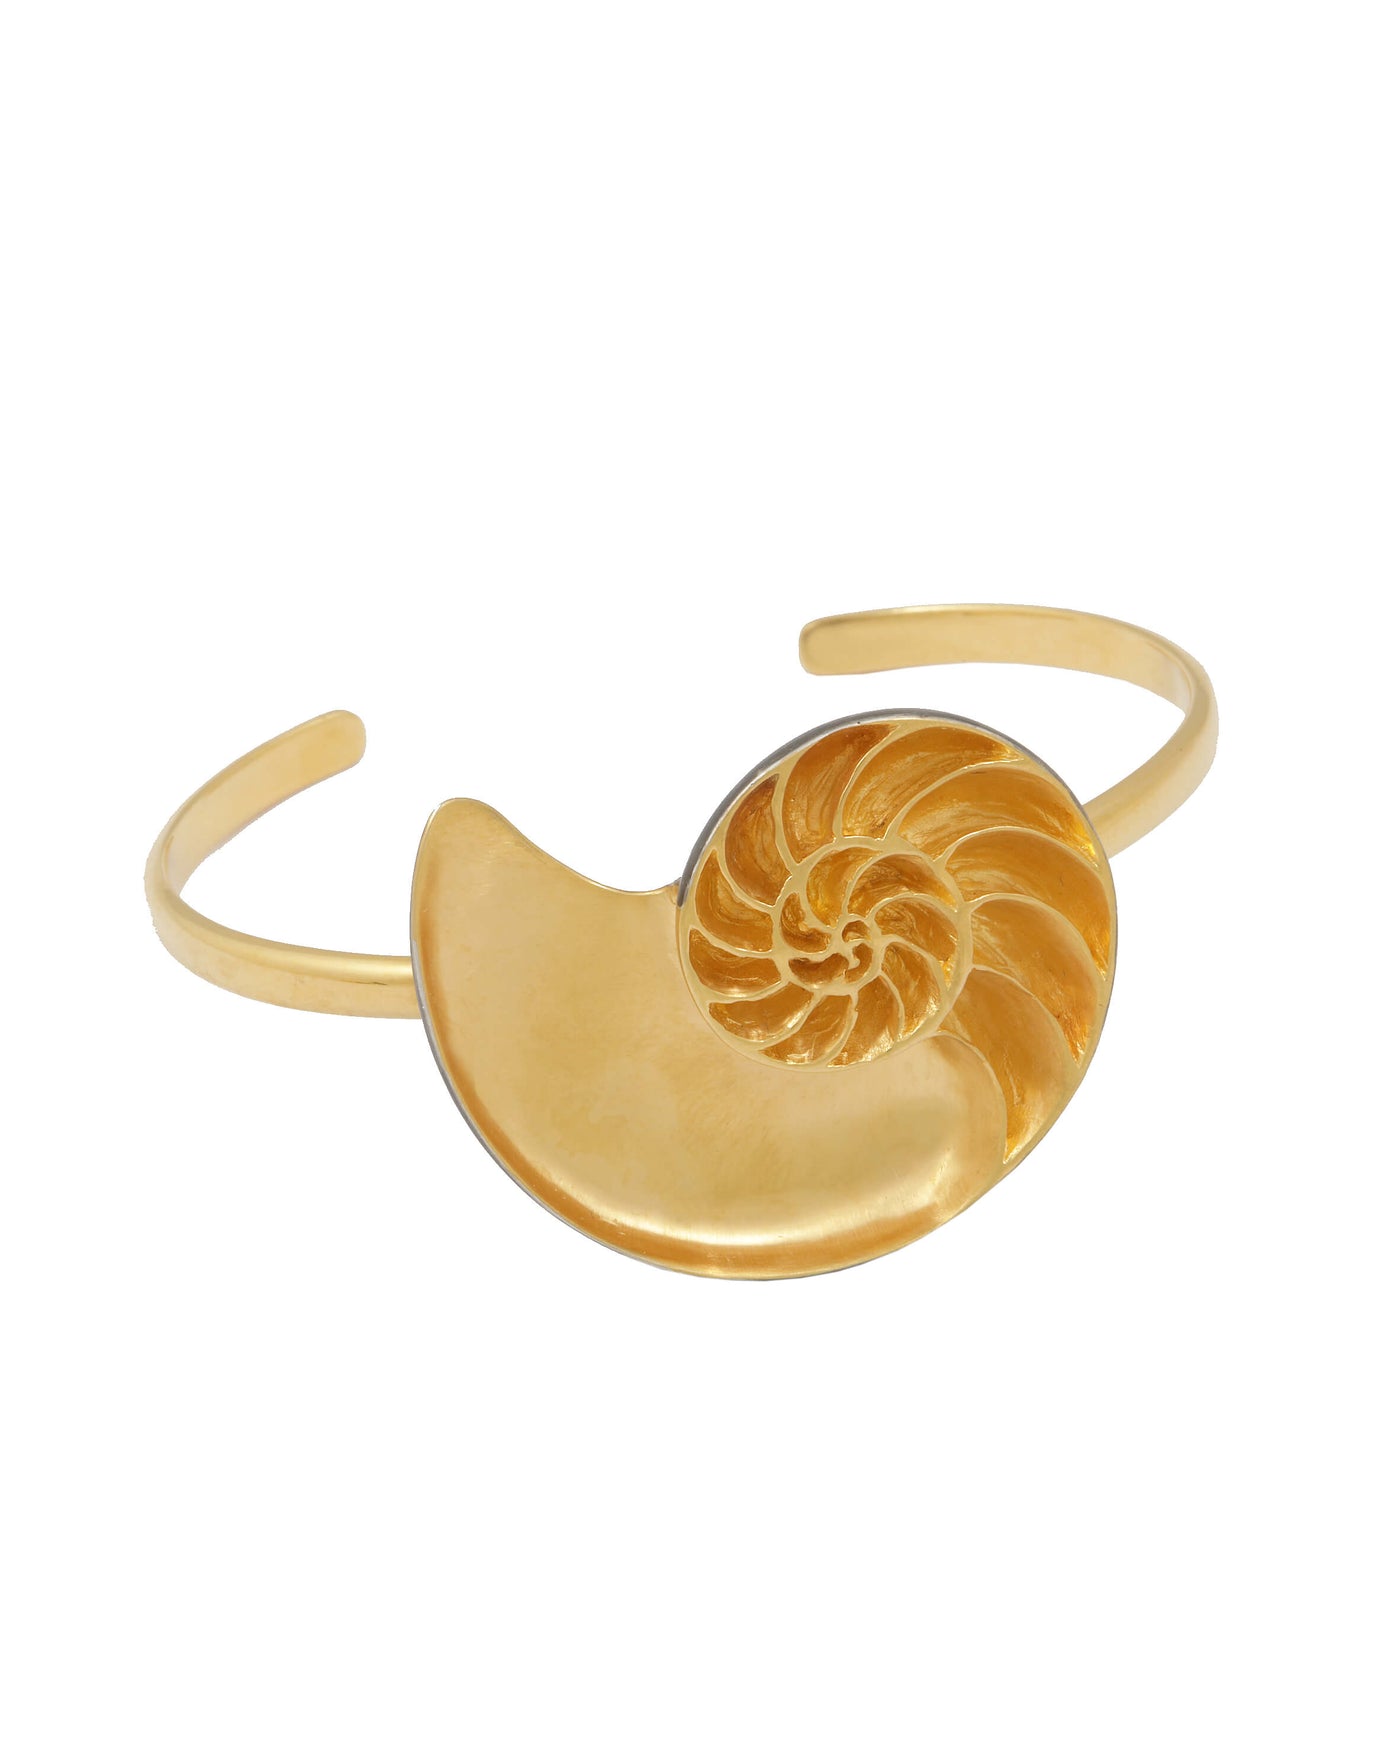 Nautilus Shell Cuff. Silver, gold-plated